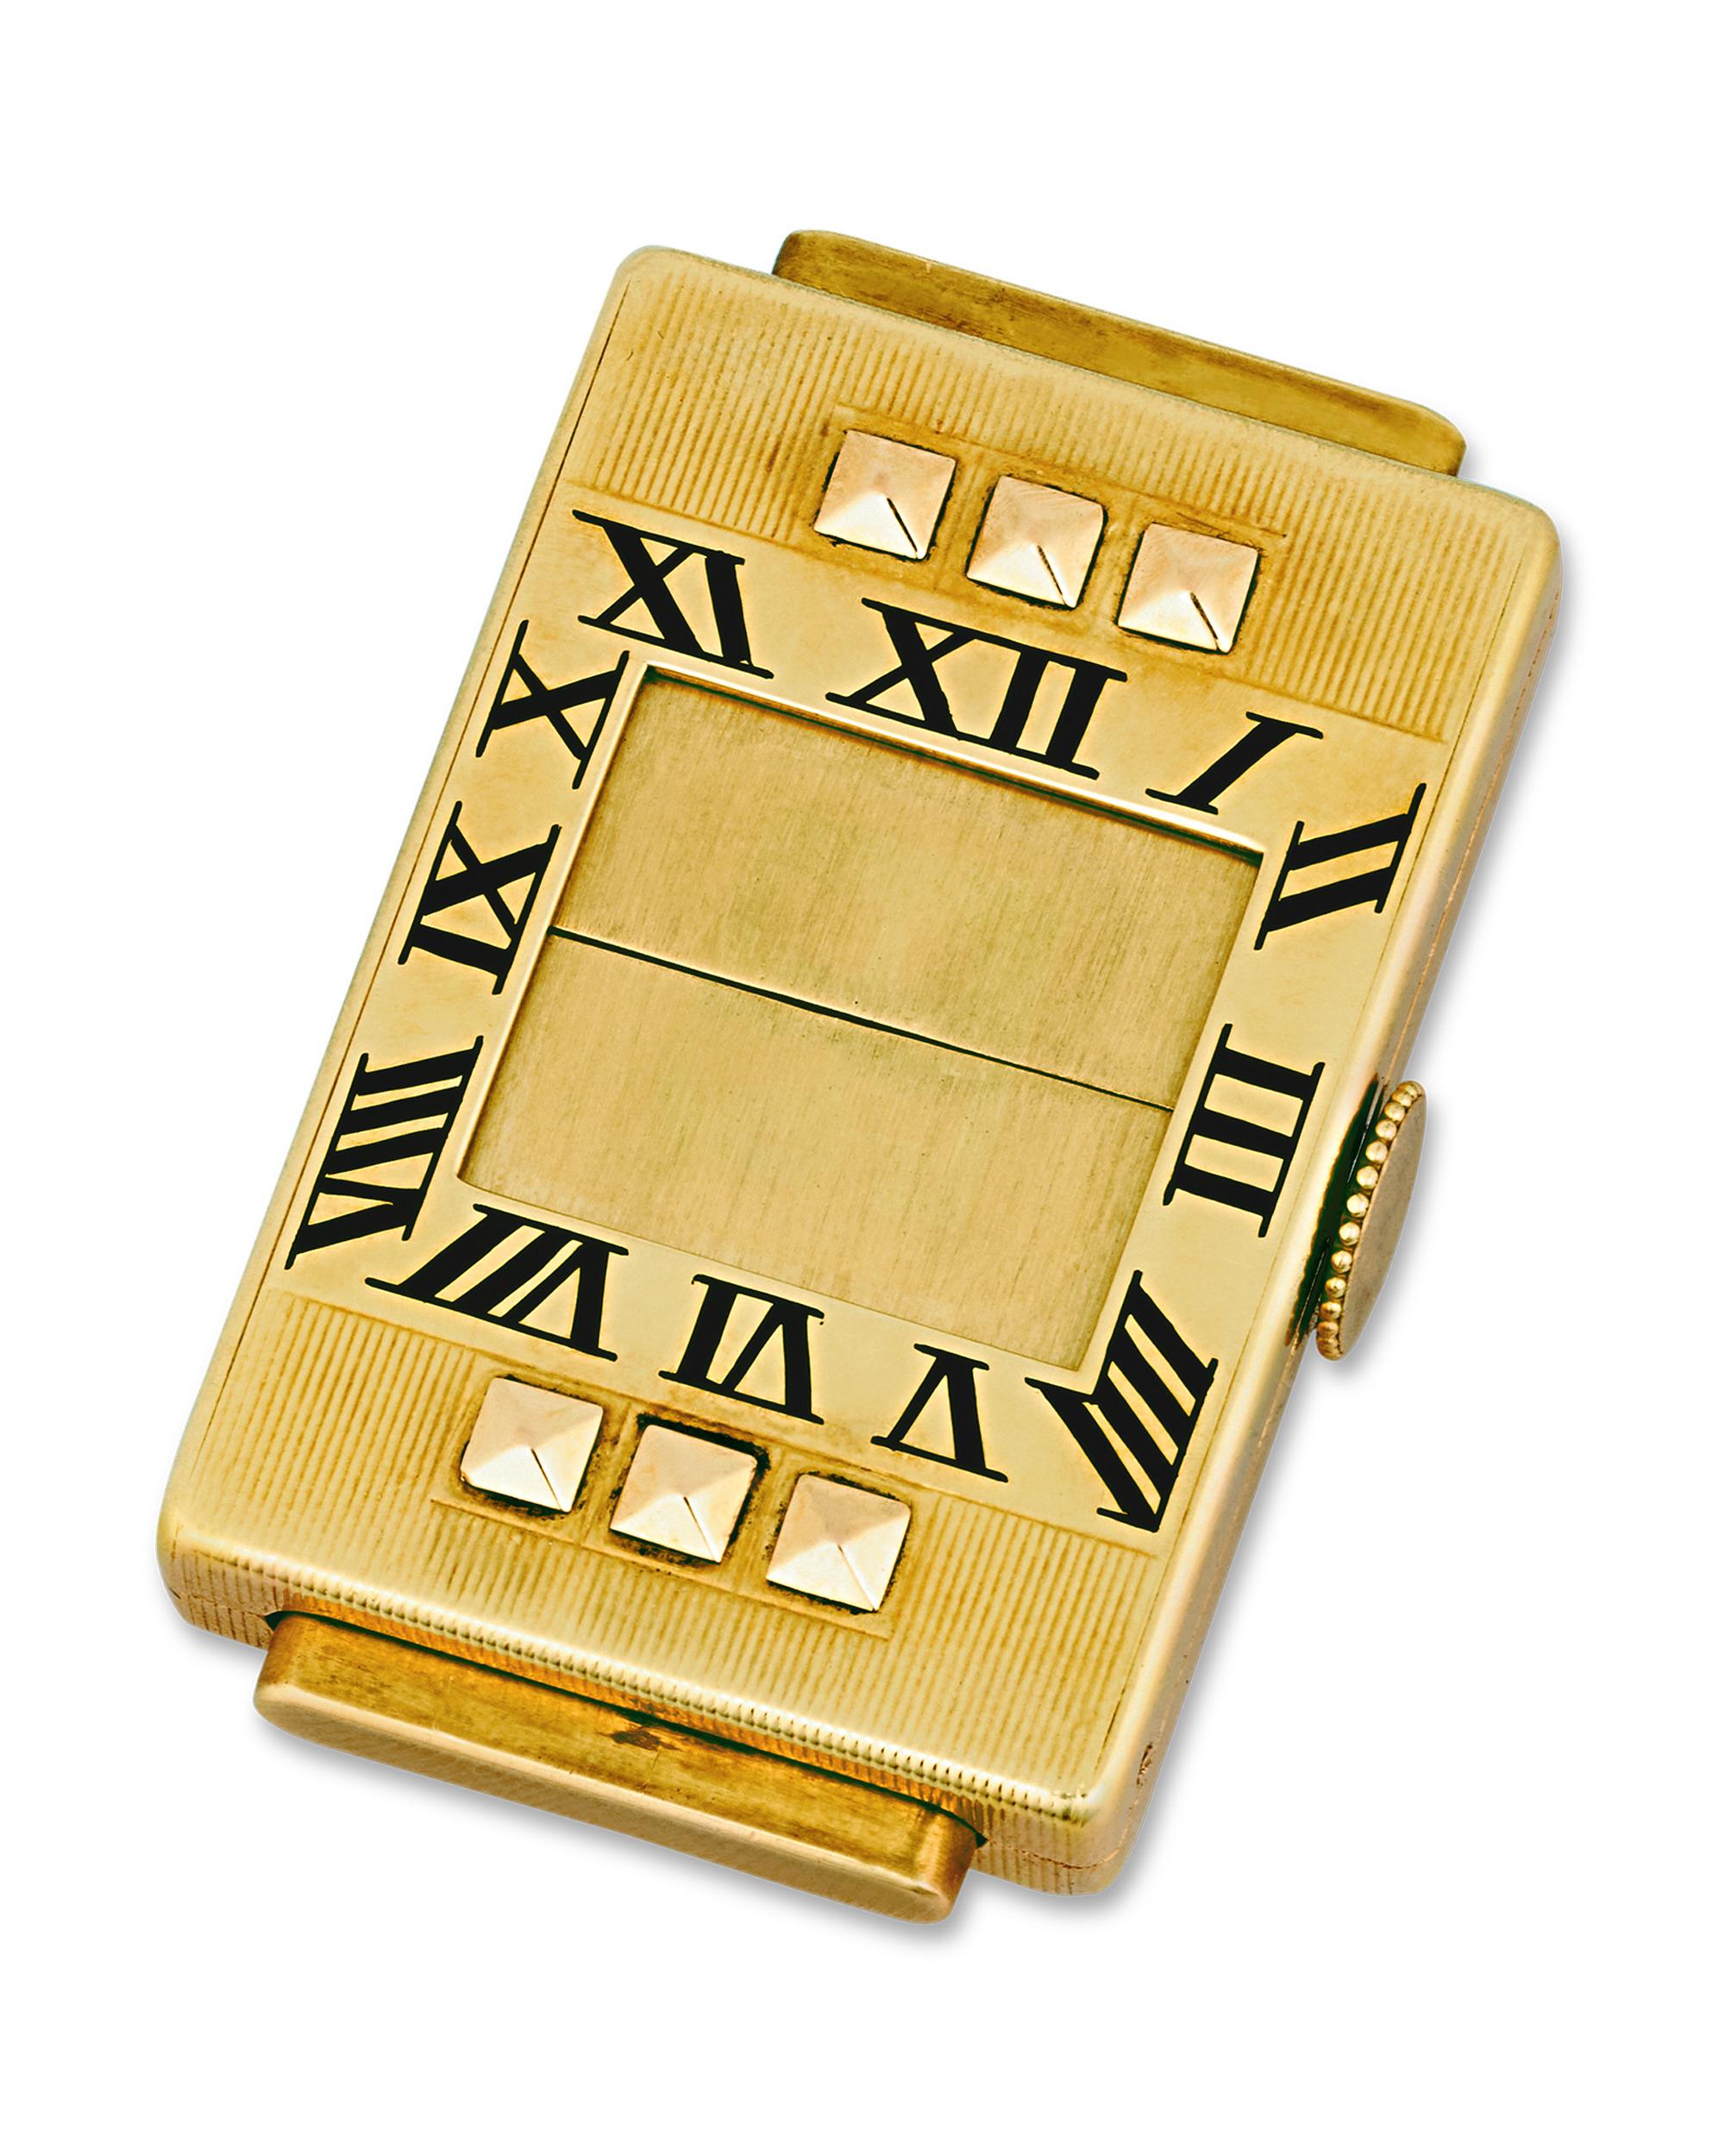 Cartier Art Deco Guillotine Purse Watch In Excellent Condition For Sale In New Orleans, LA